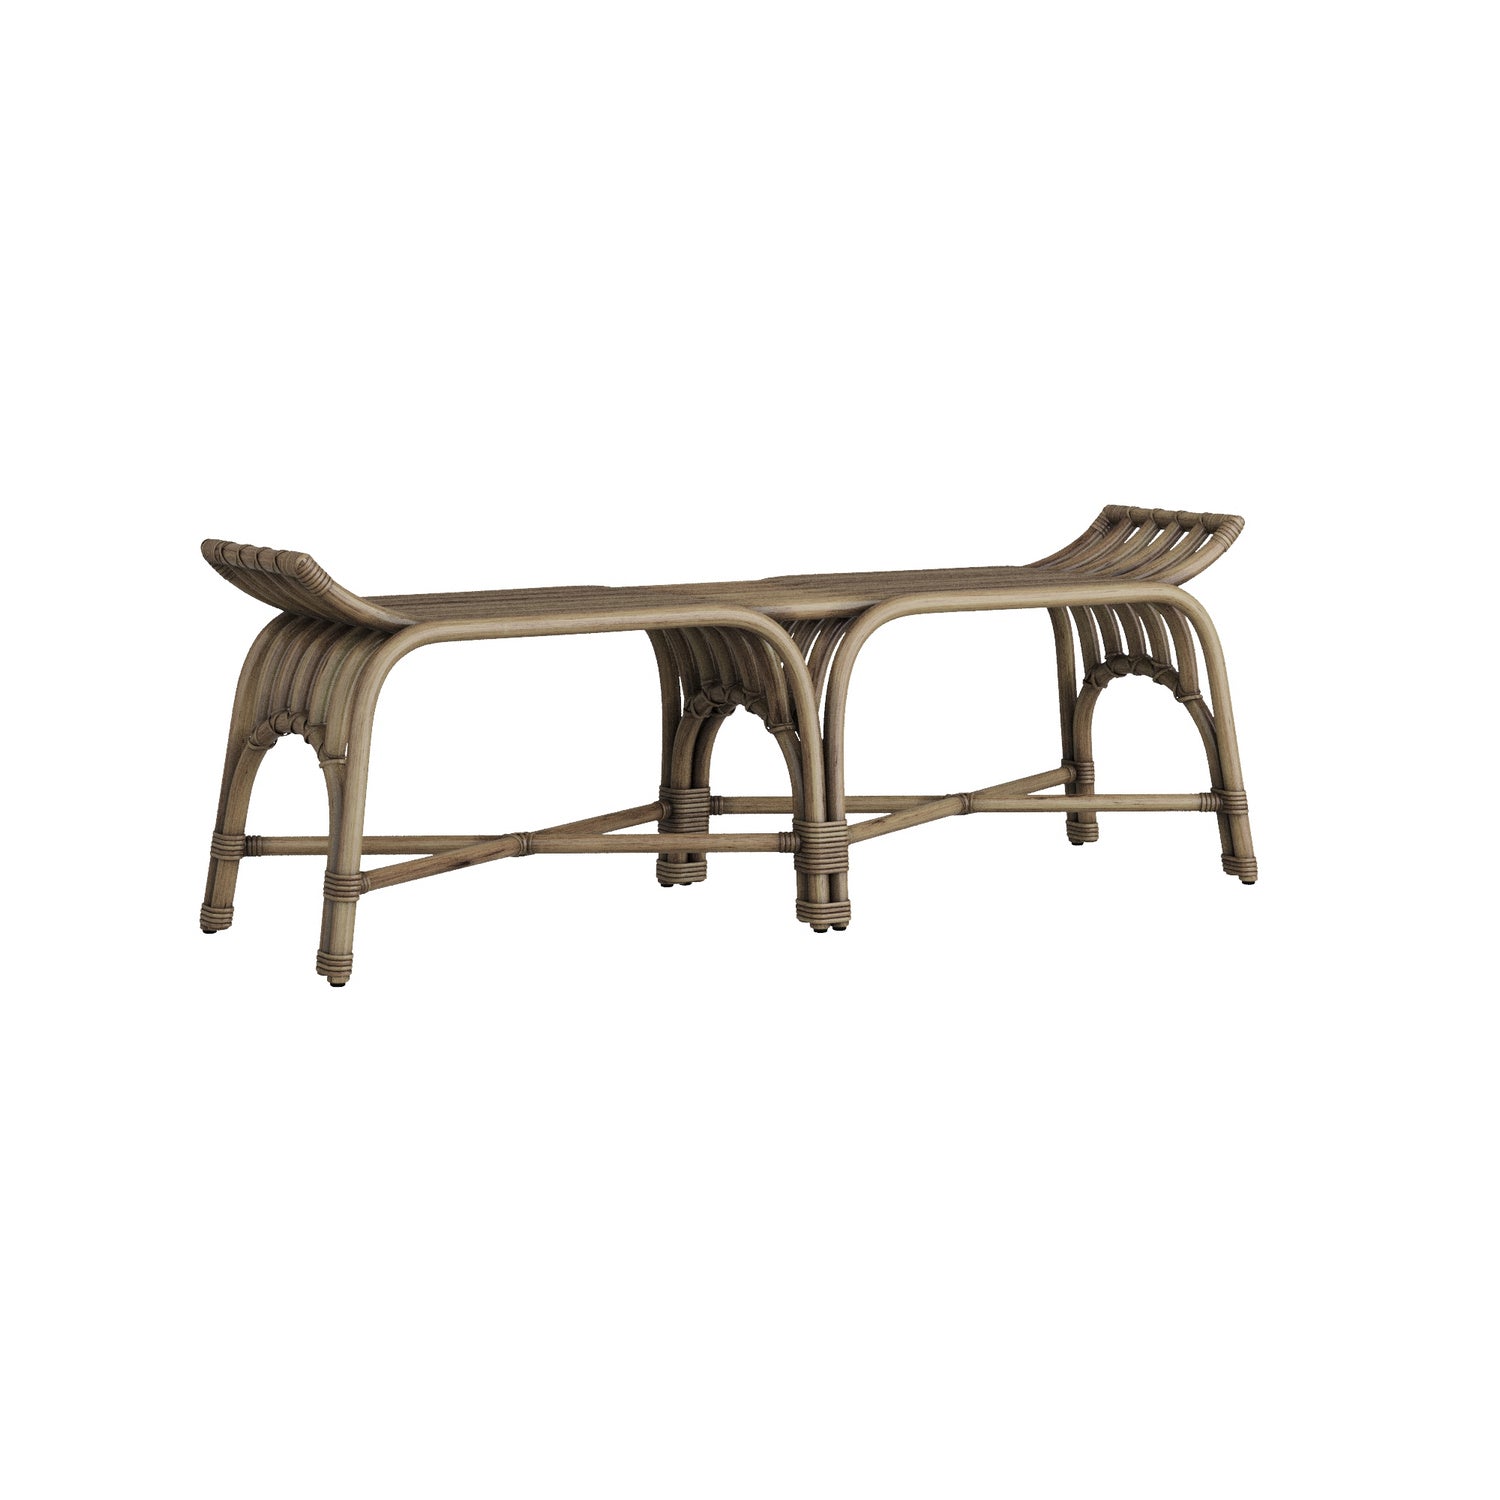 Bench from the Purcell collection in Gray Wash finish